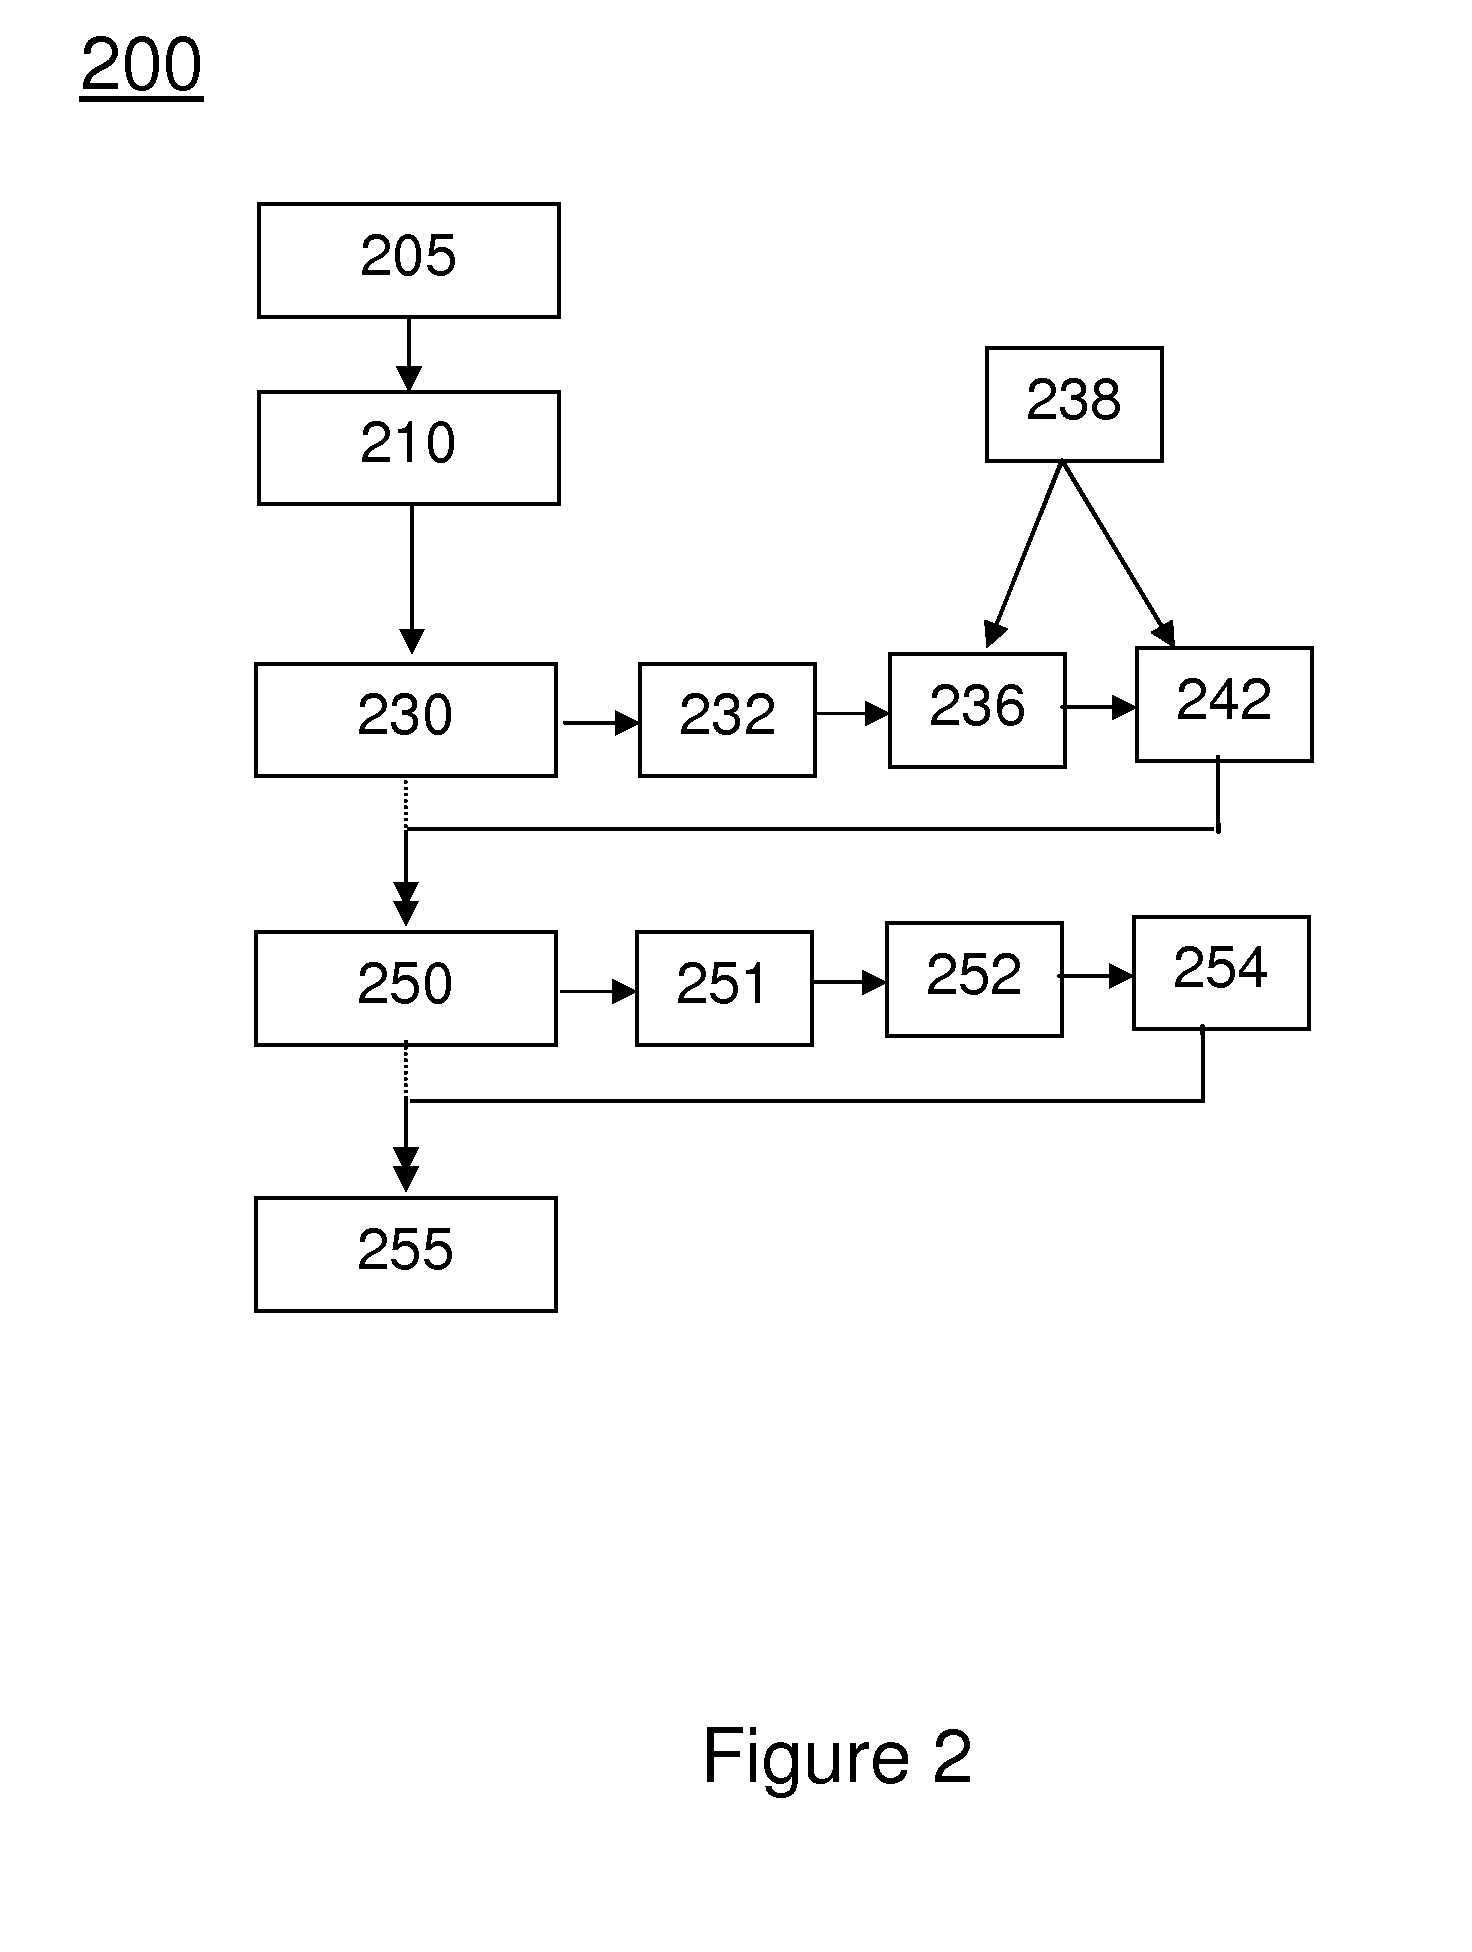 System and method for resiliency planning